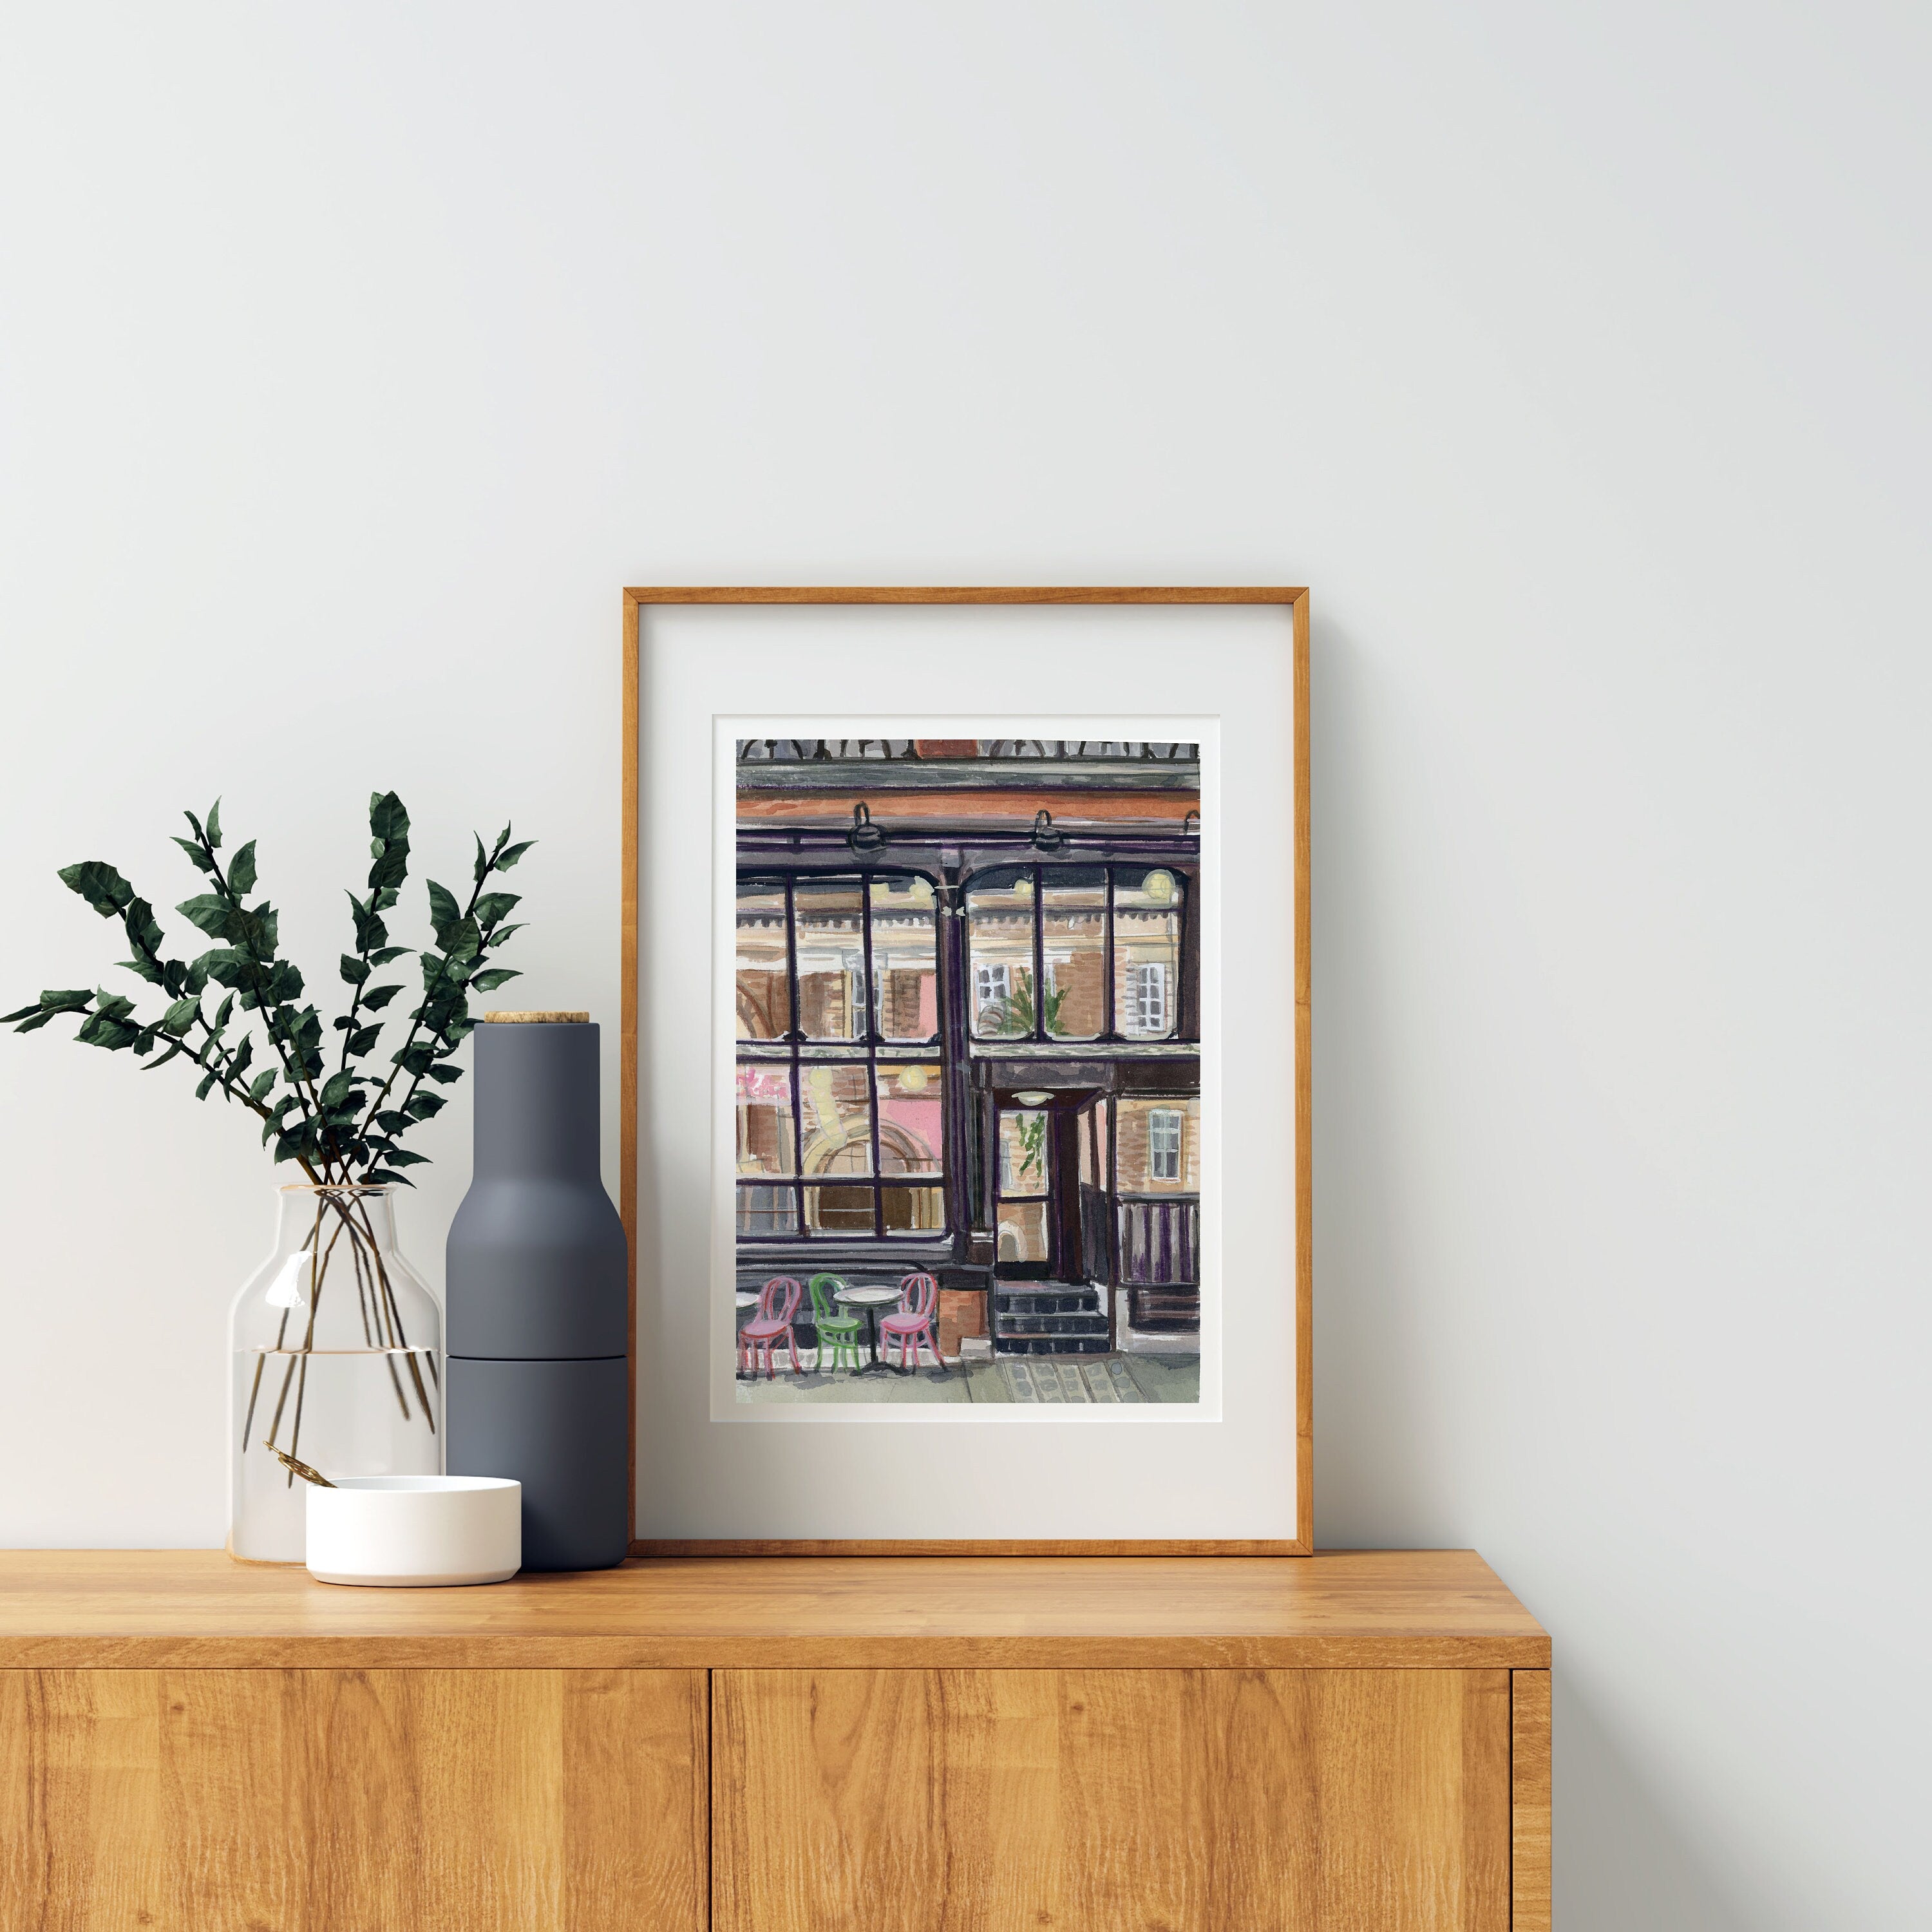 New York city coffee shop print of painting by Medjool Studio. Print of original gouache painting of a New York City cafe. This piece of art transports you to the bustling streets of the Big Apple, where the aroma of freshly brewed coffee and the warmth of community fill the air.